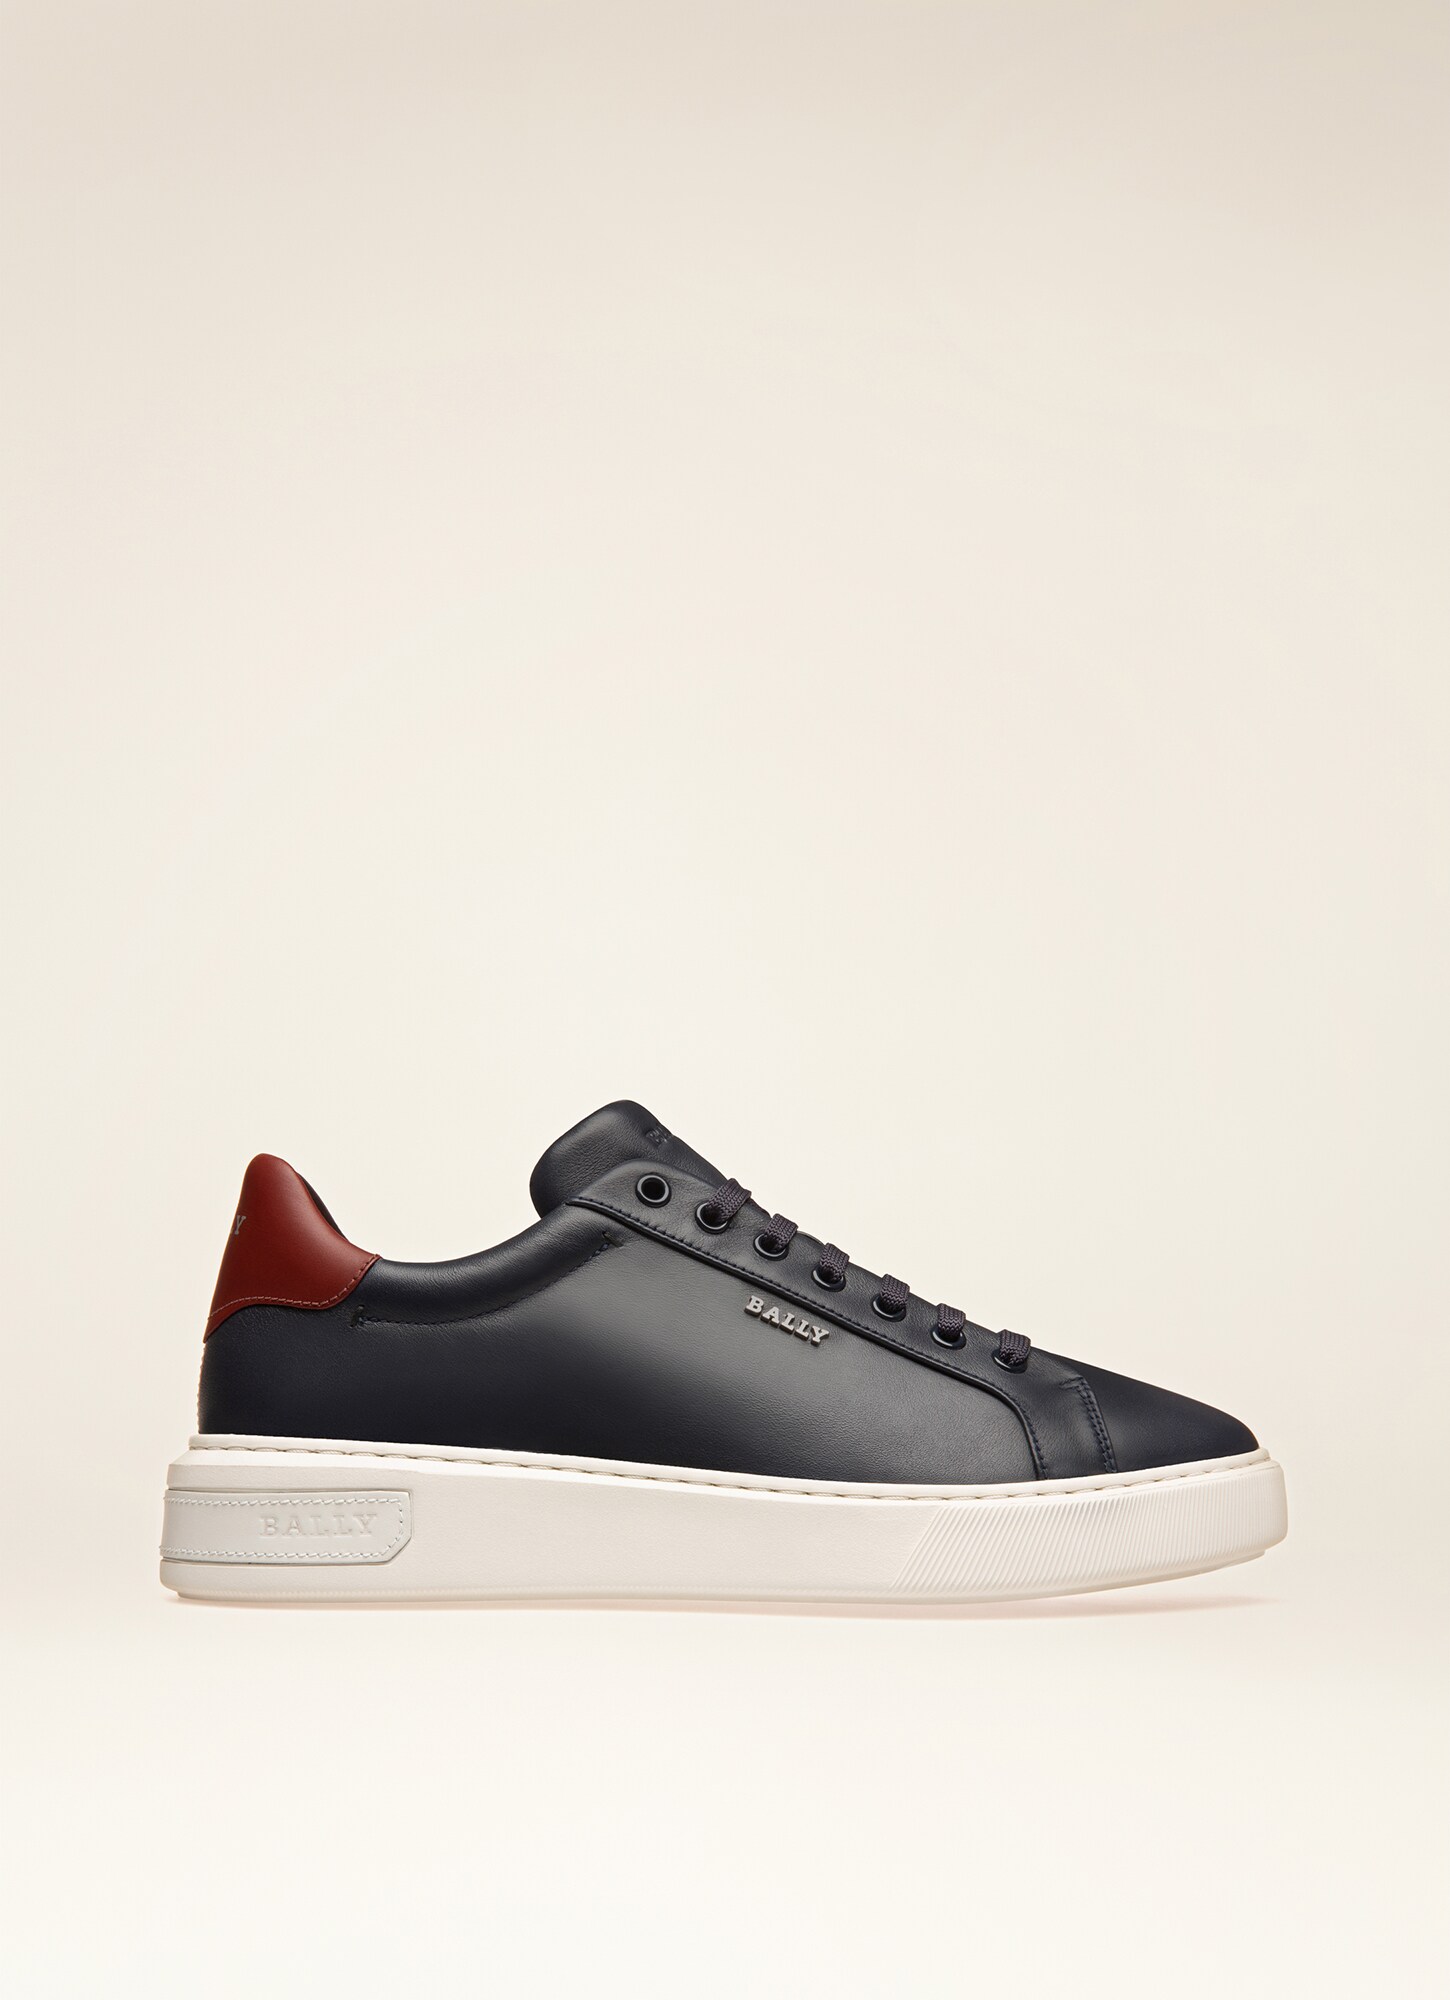 Miky | Mens Sneakers | Navy Leather | Bally